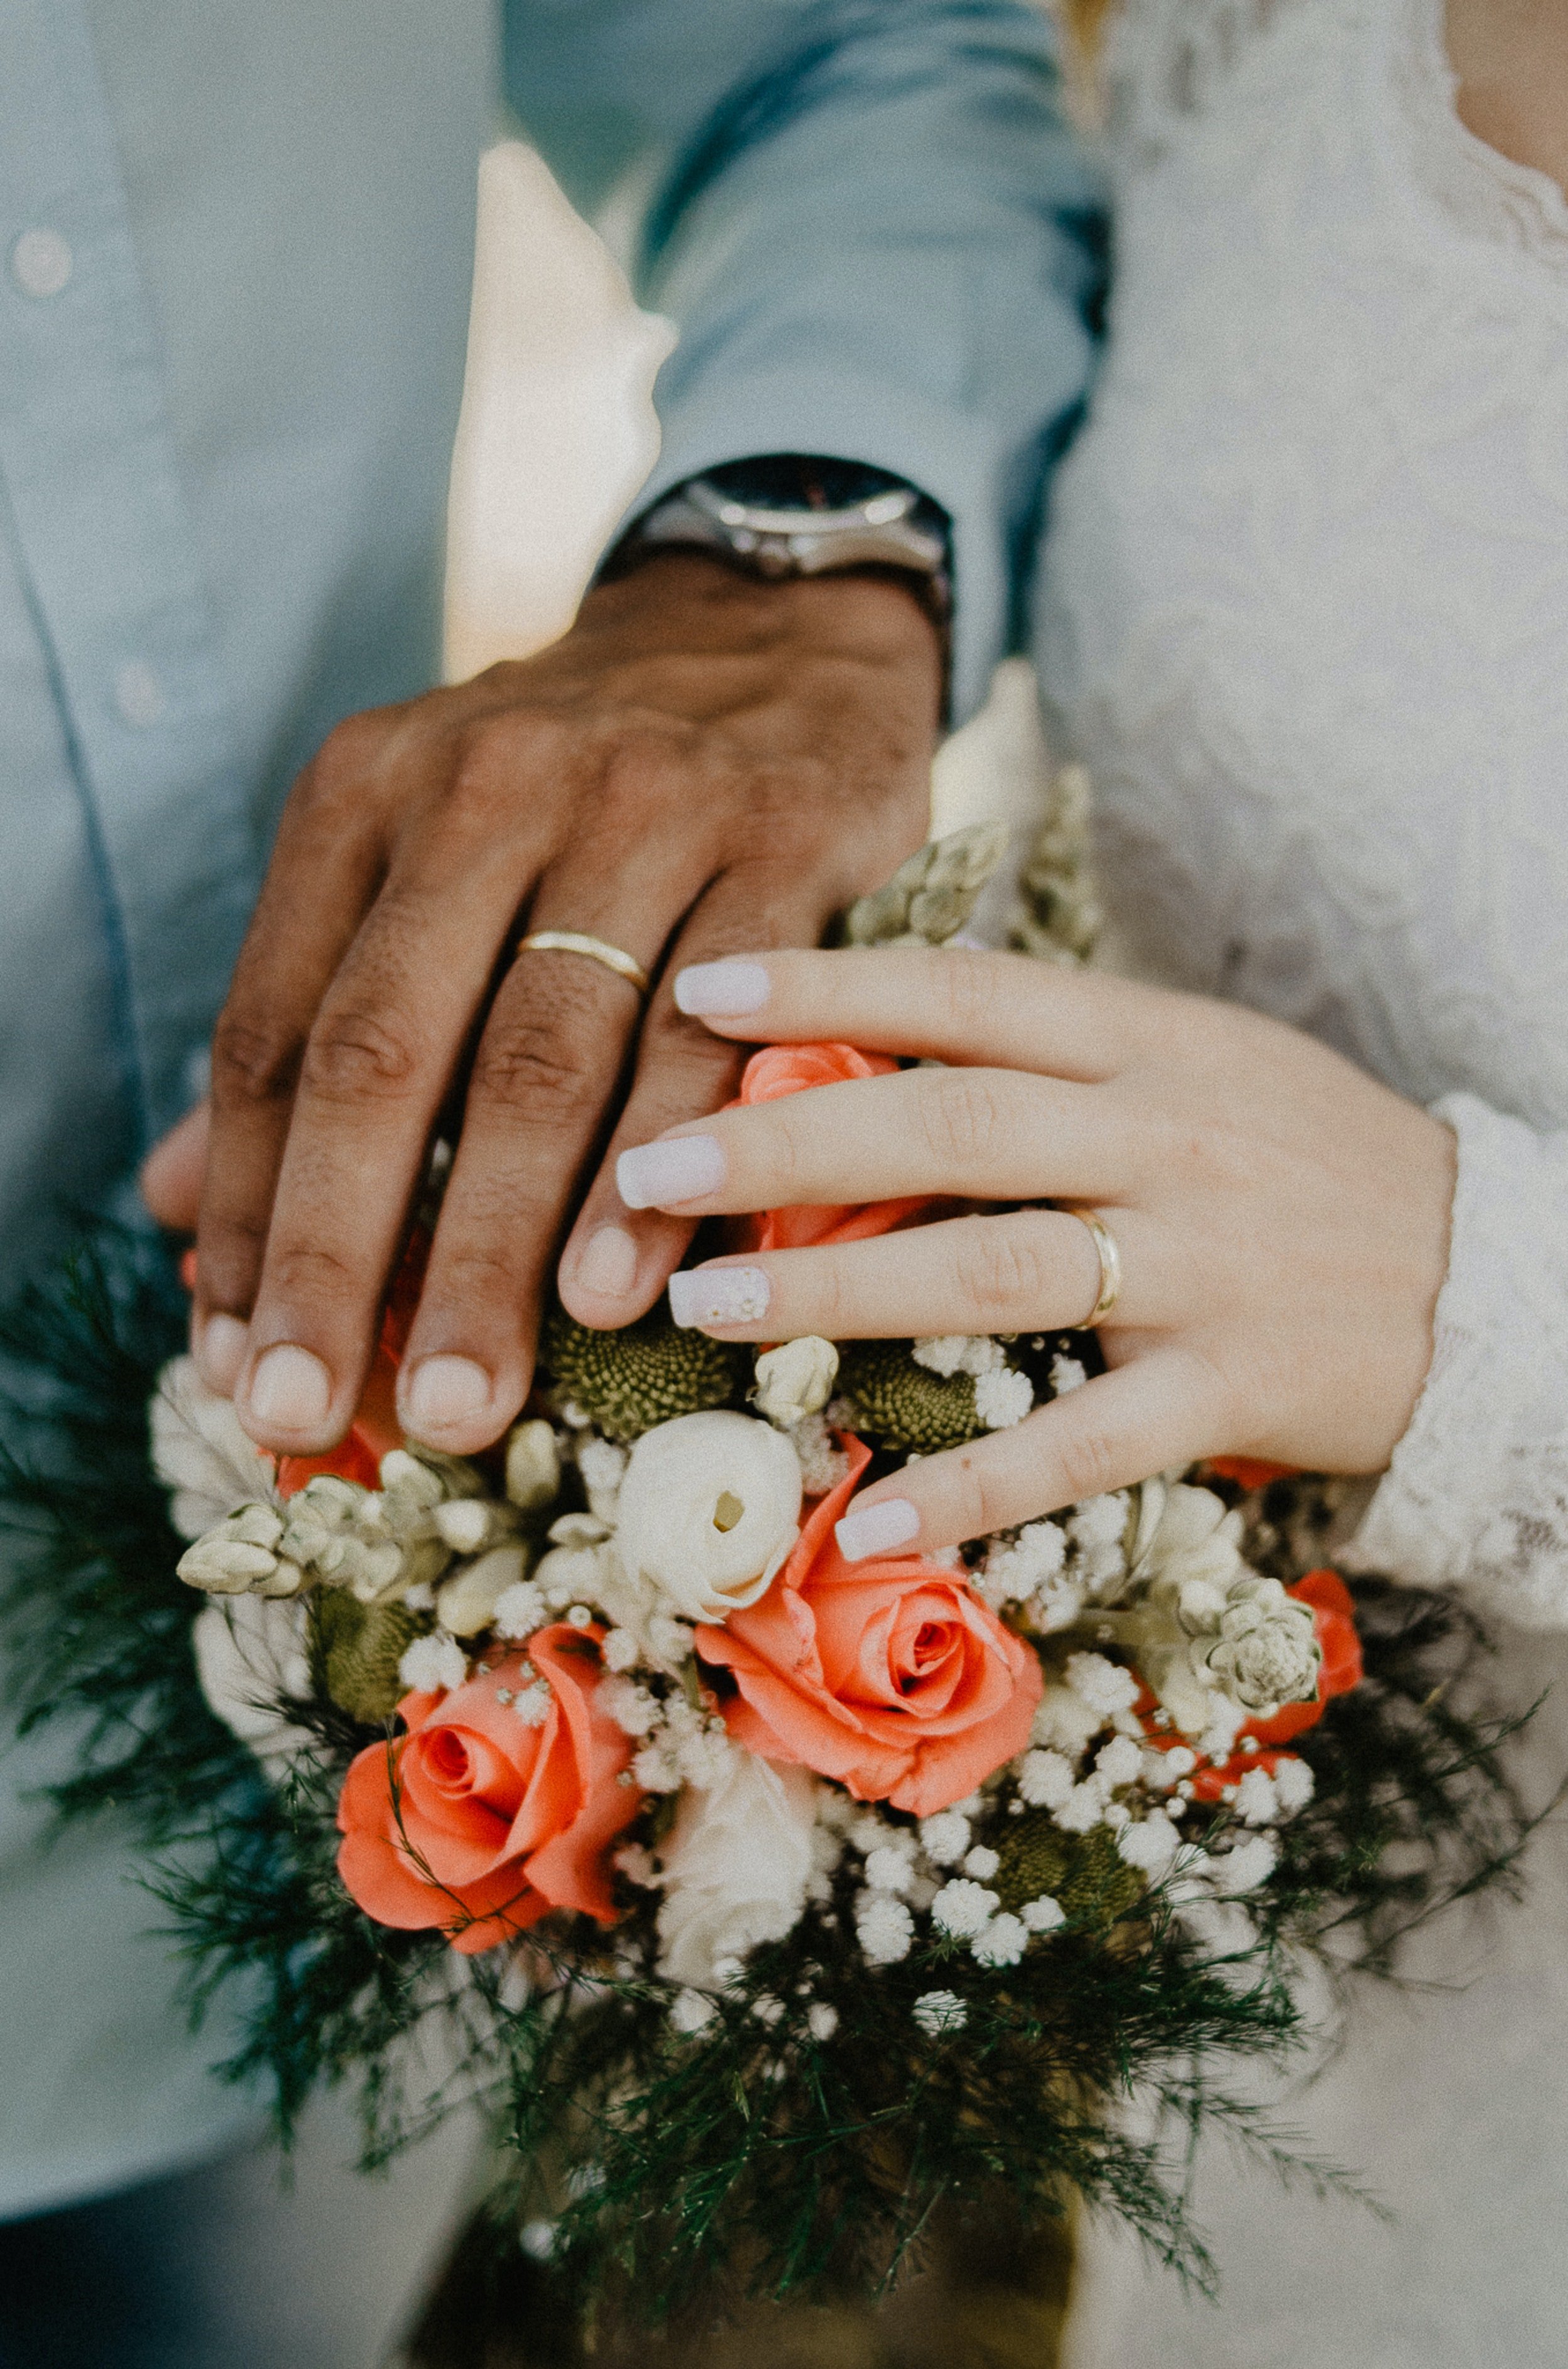 A couple of newlyweds hold a bouquet of flowers on their wedding day. I Image: Pexels.